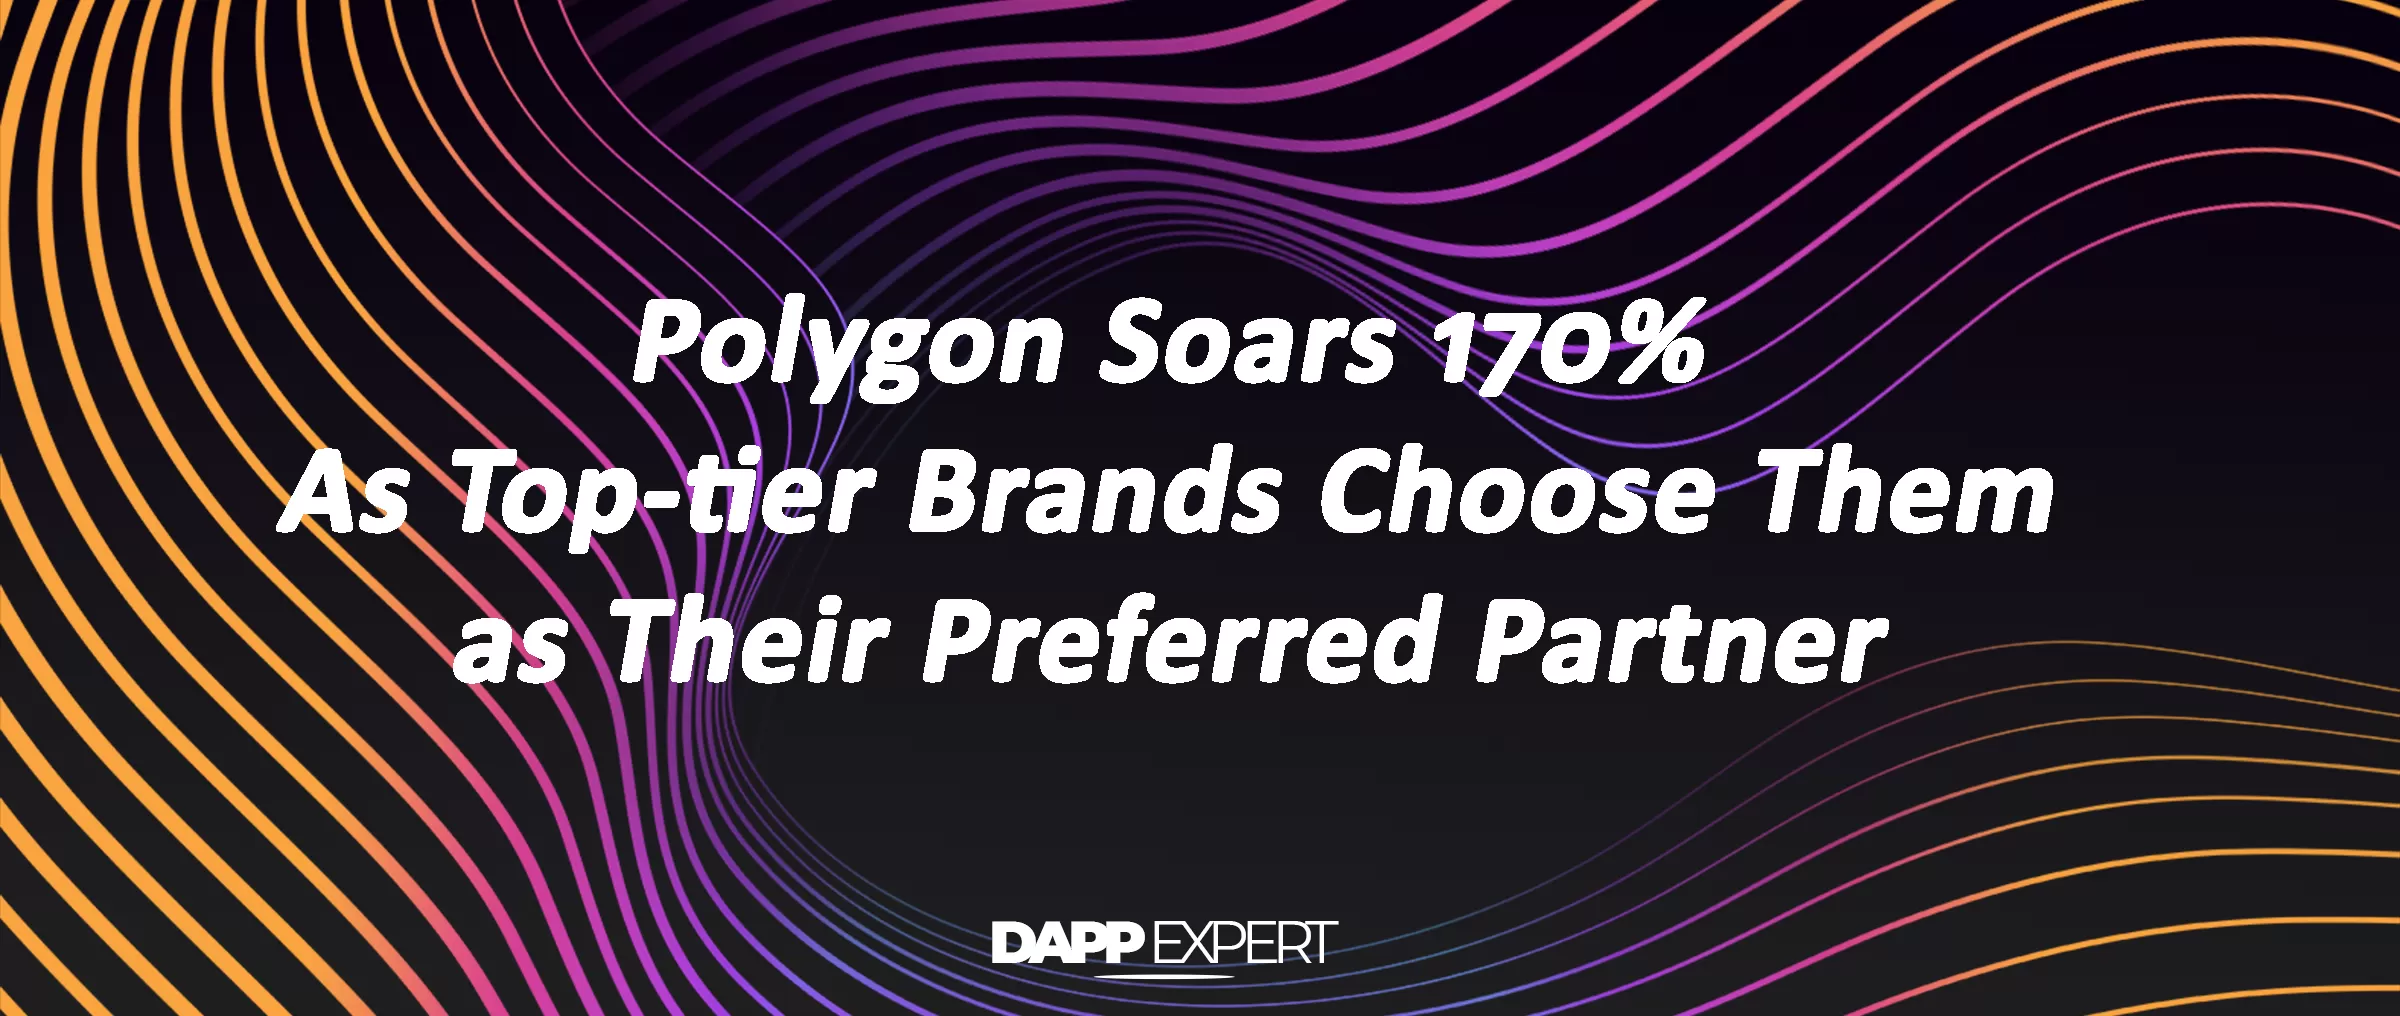 Polygon Soars 170% As Top-tier Brands Choose Them as Their Preferred Partner